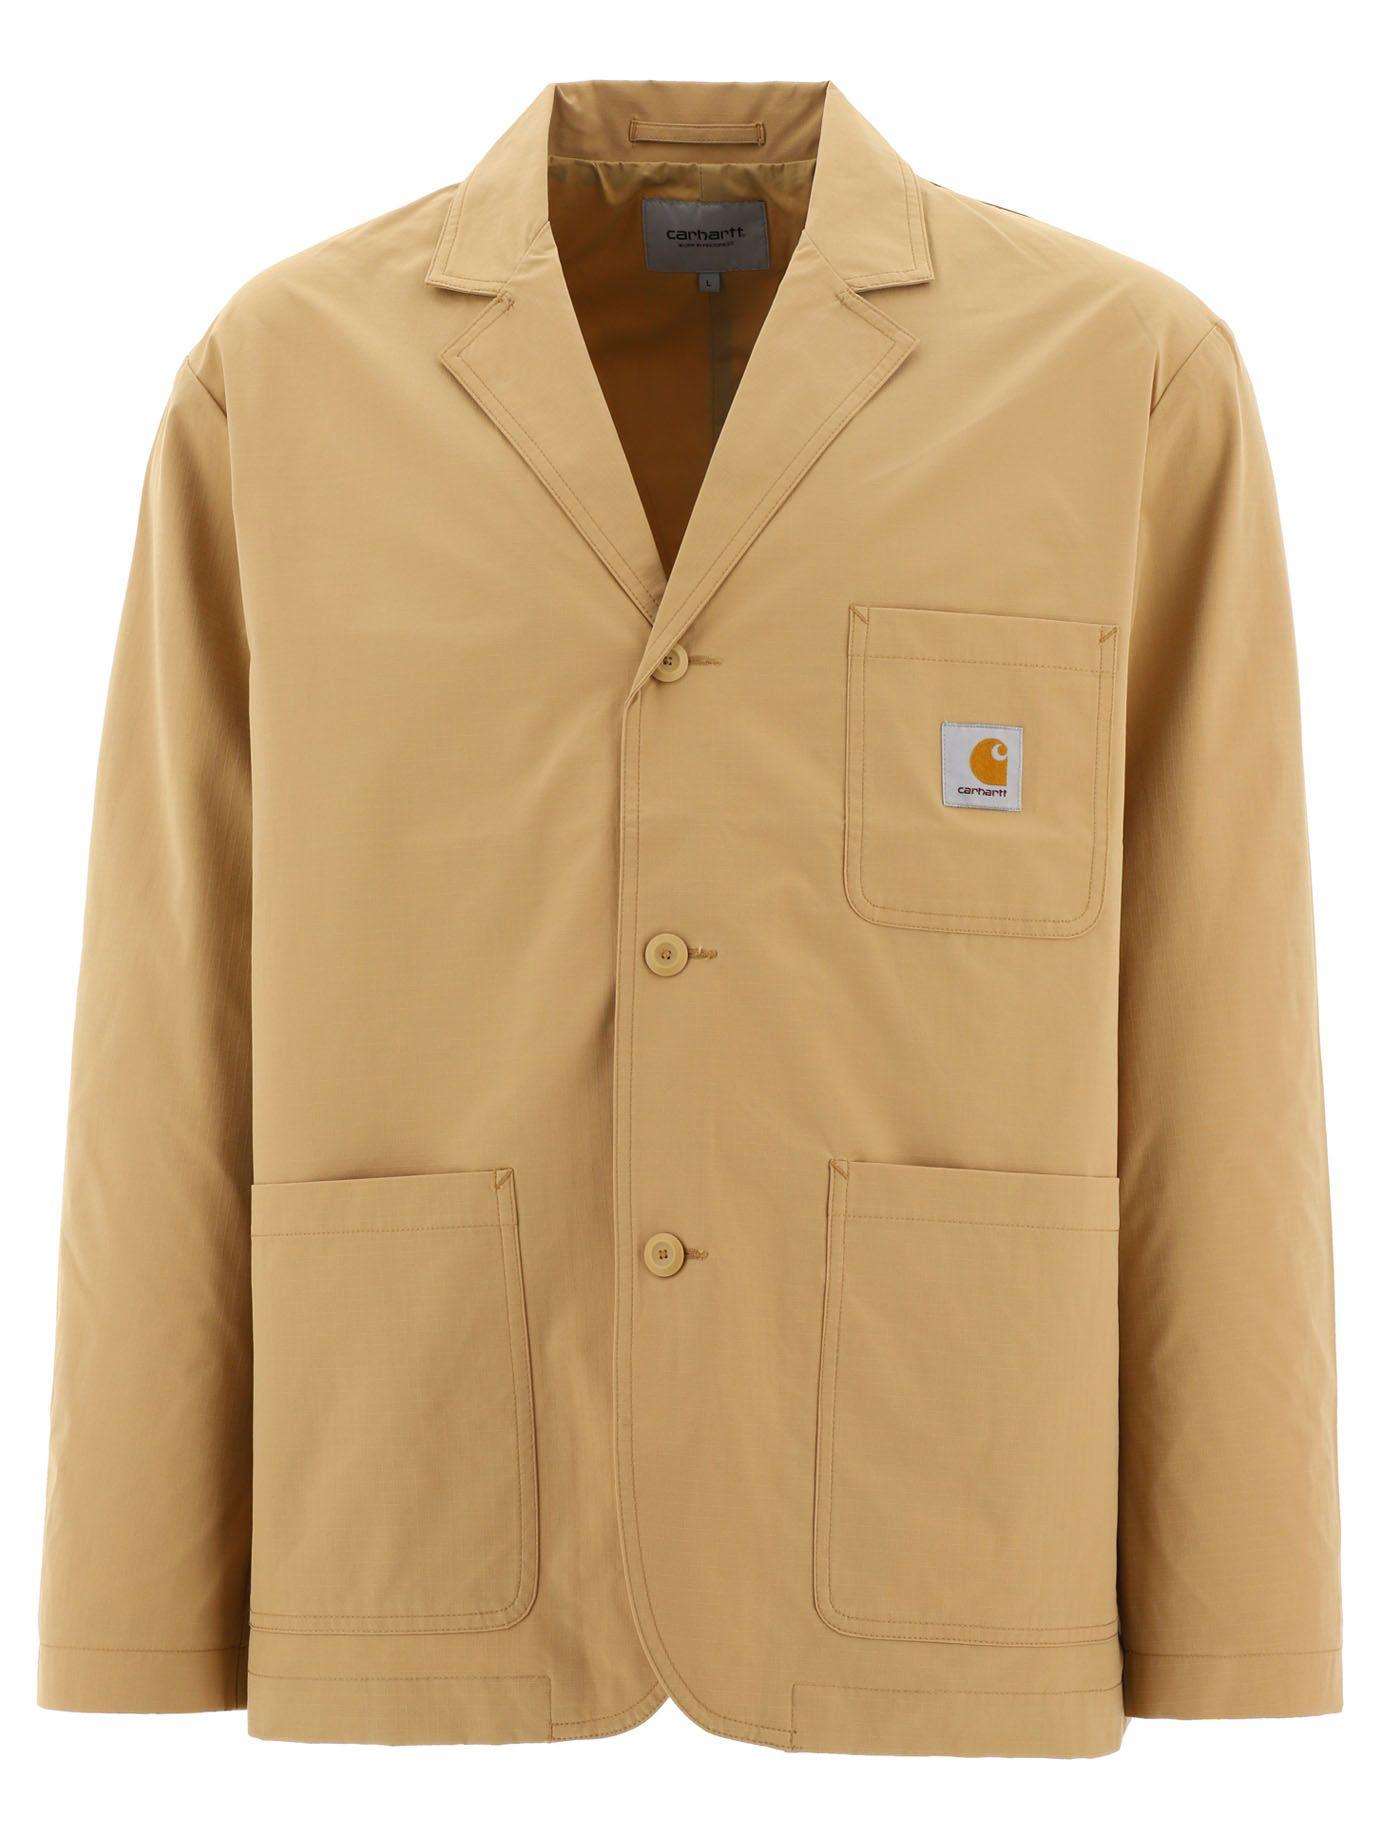 Carhartt WIP Outerwear Jacket in Natural for Men | Lyst